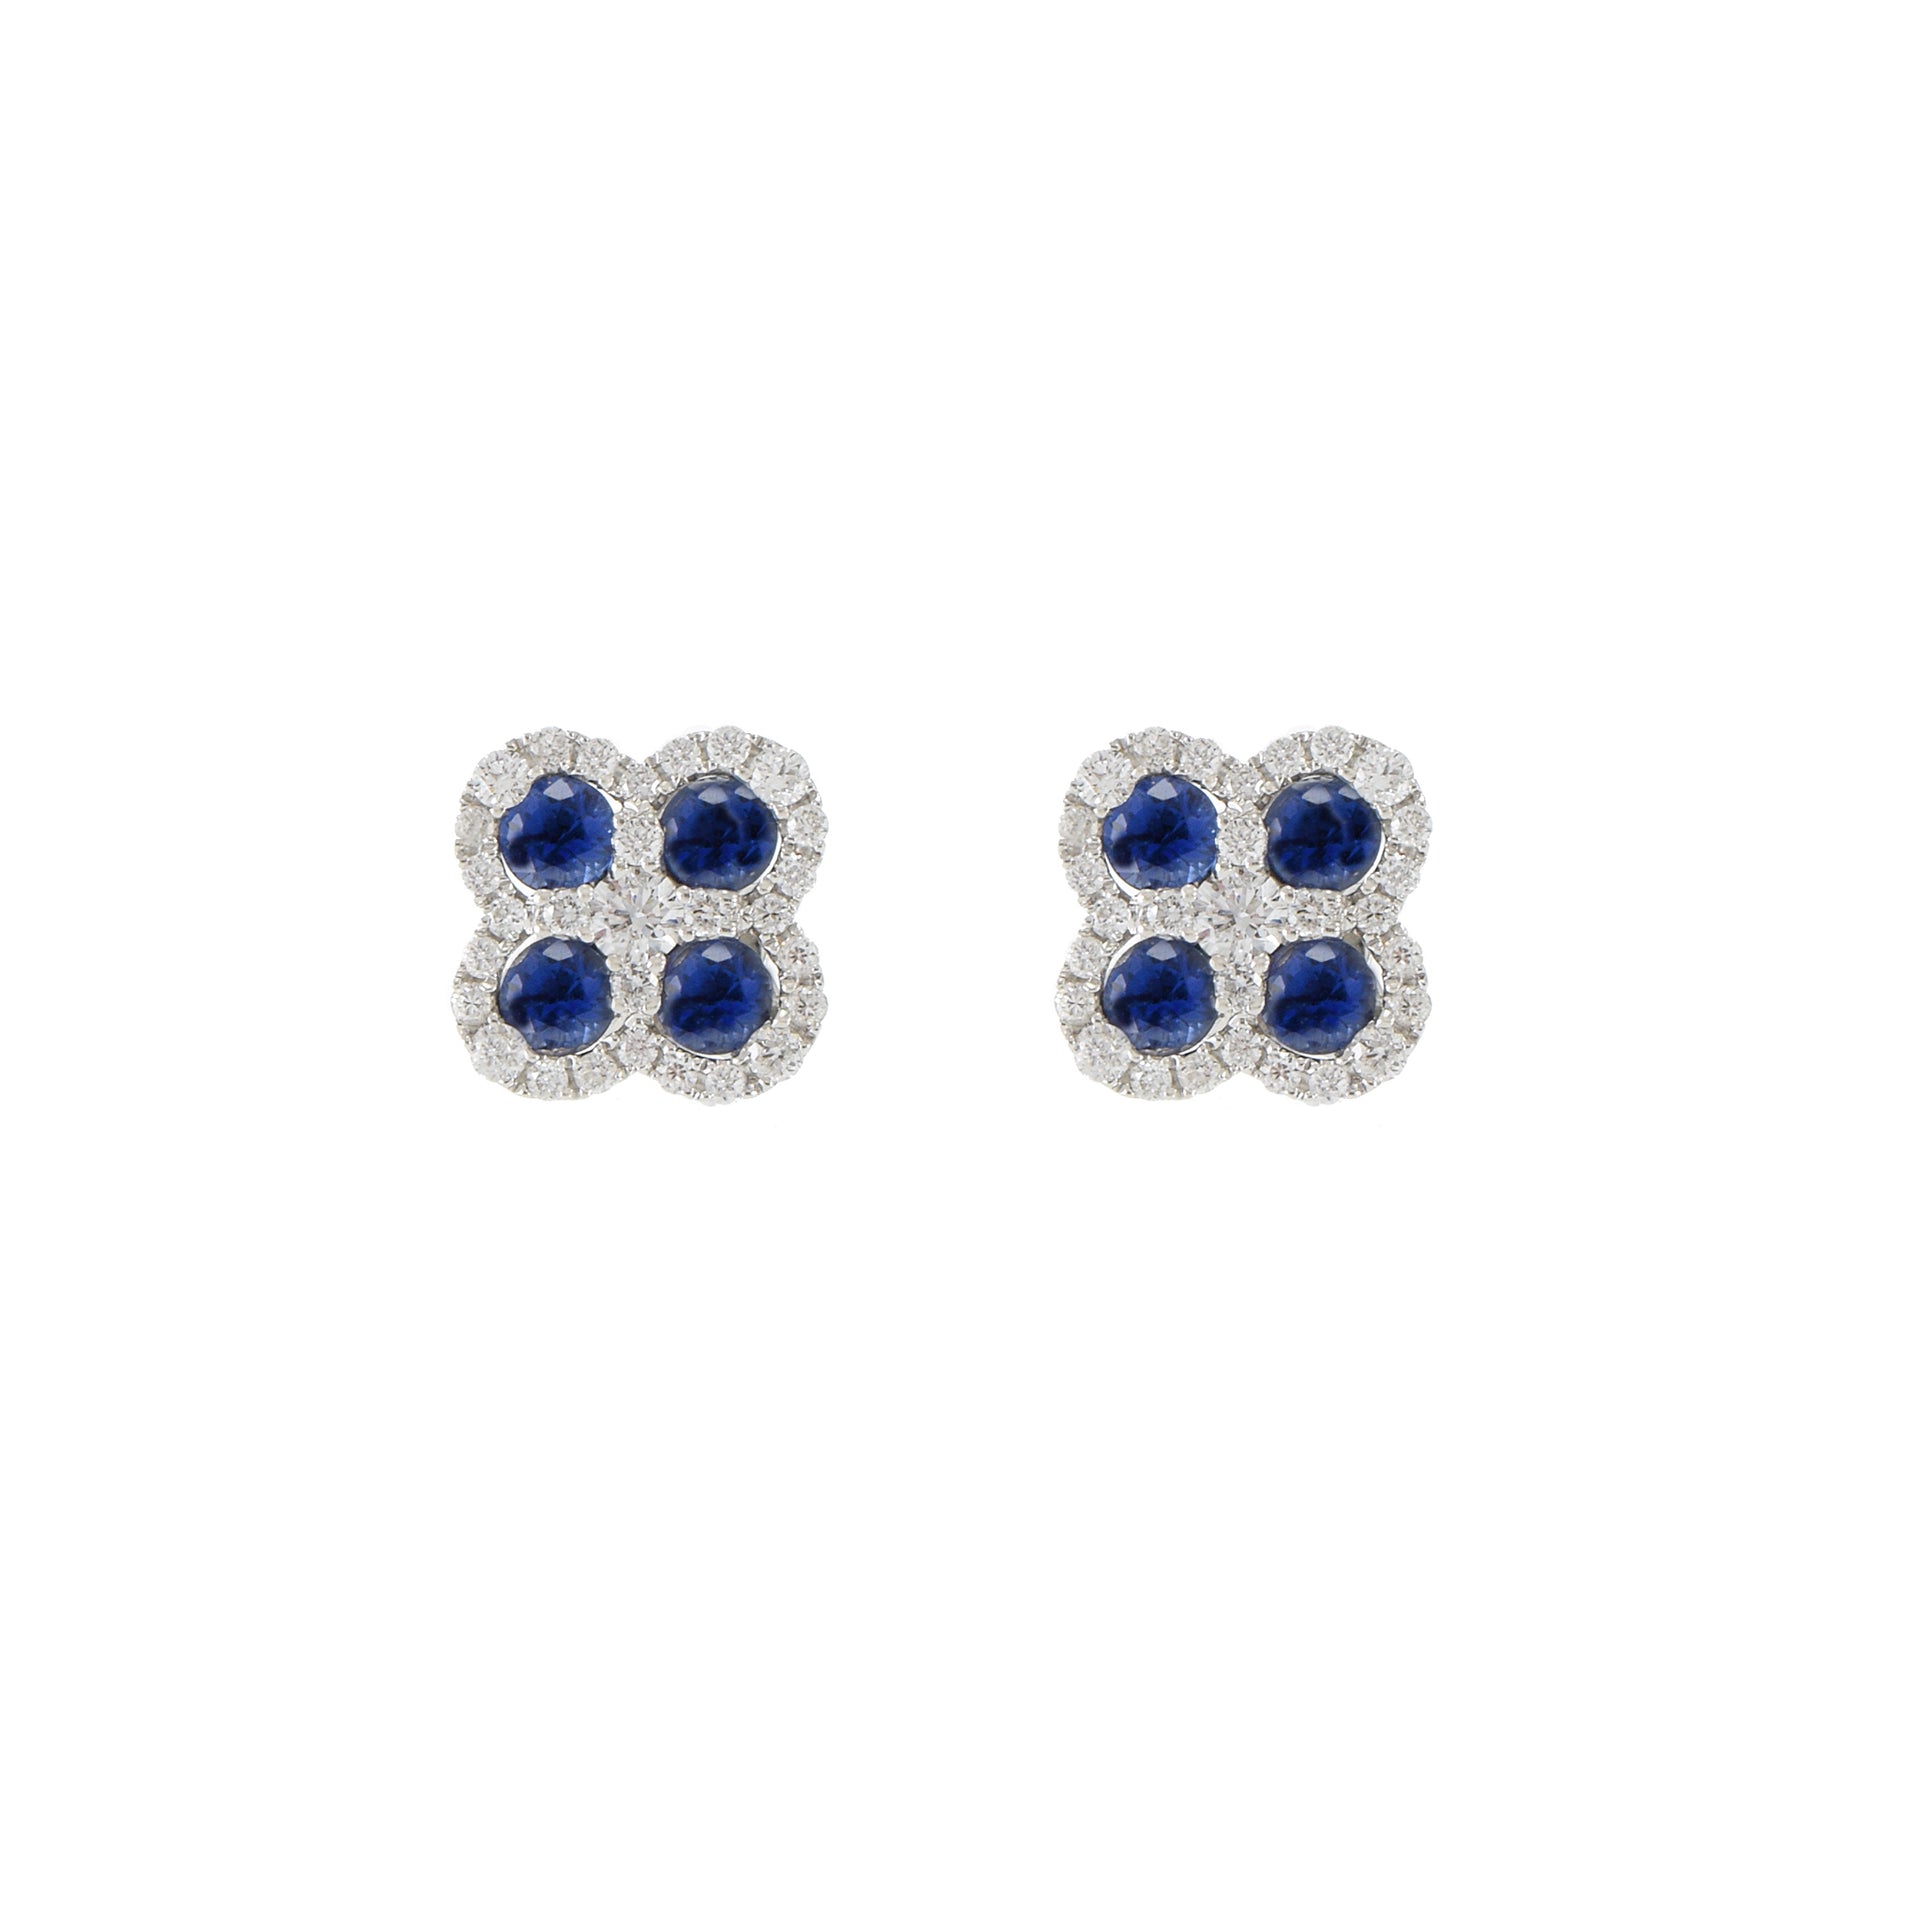 18KT White Gold Round Cut Blue Sapphire And Diamond Clover Earrings